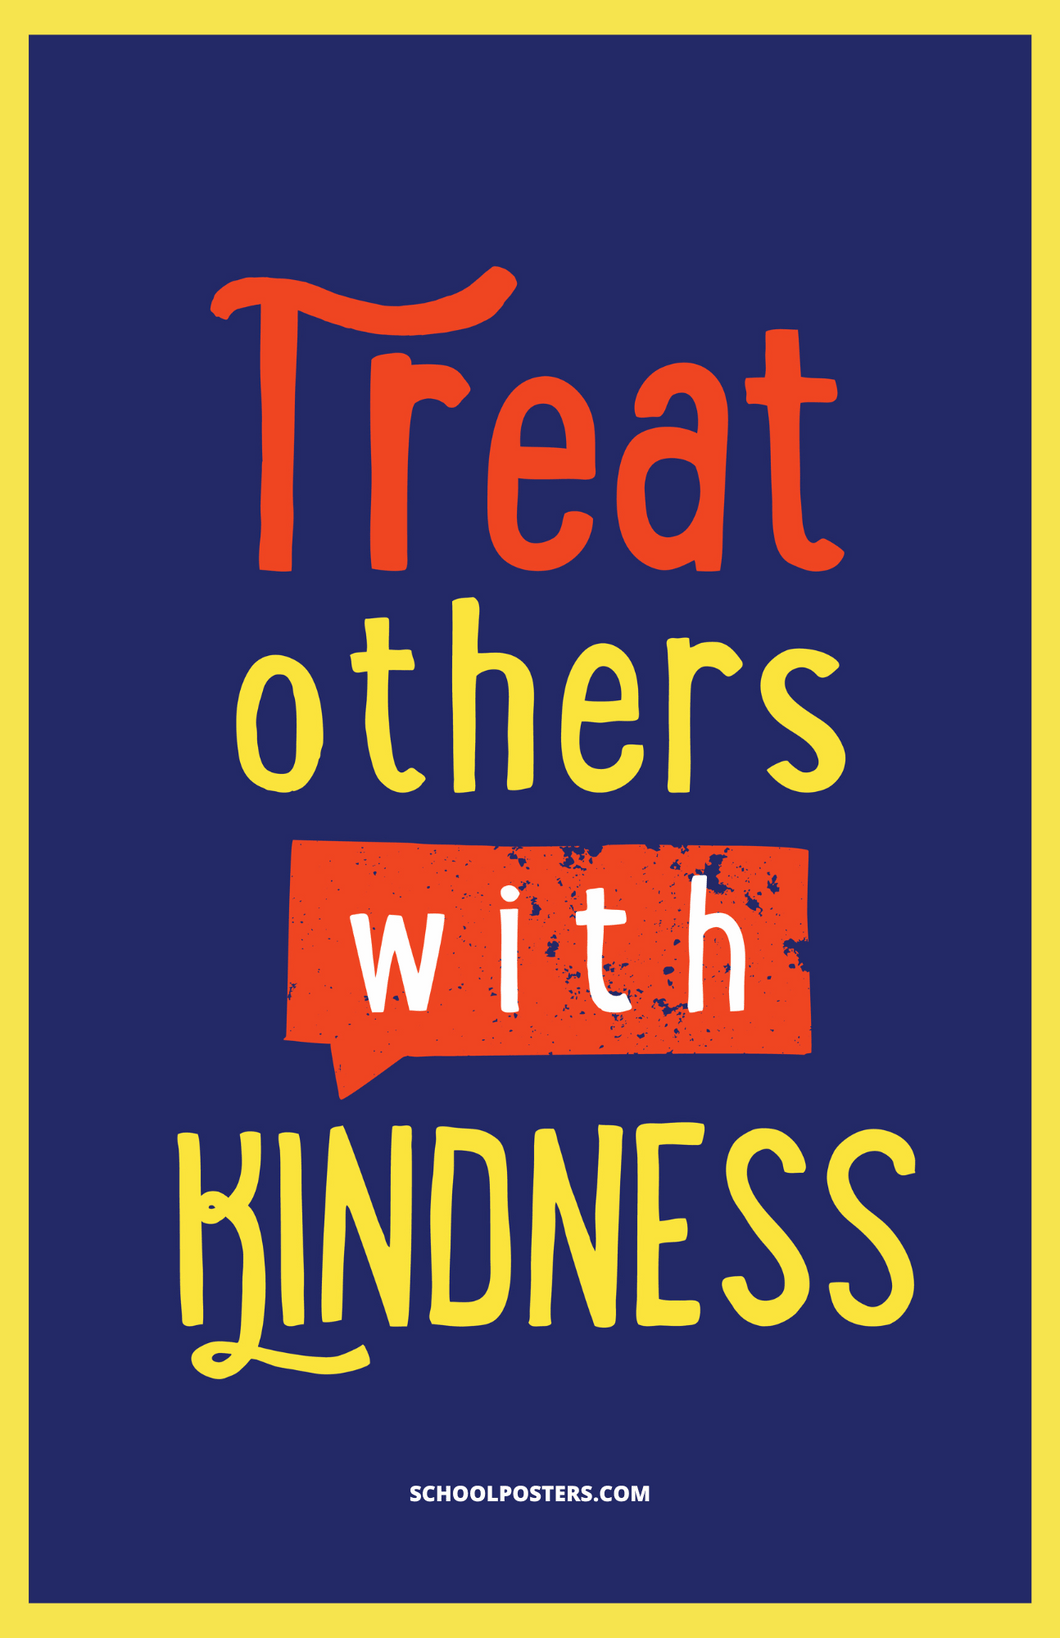 Treat Others With Kindness Poster